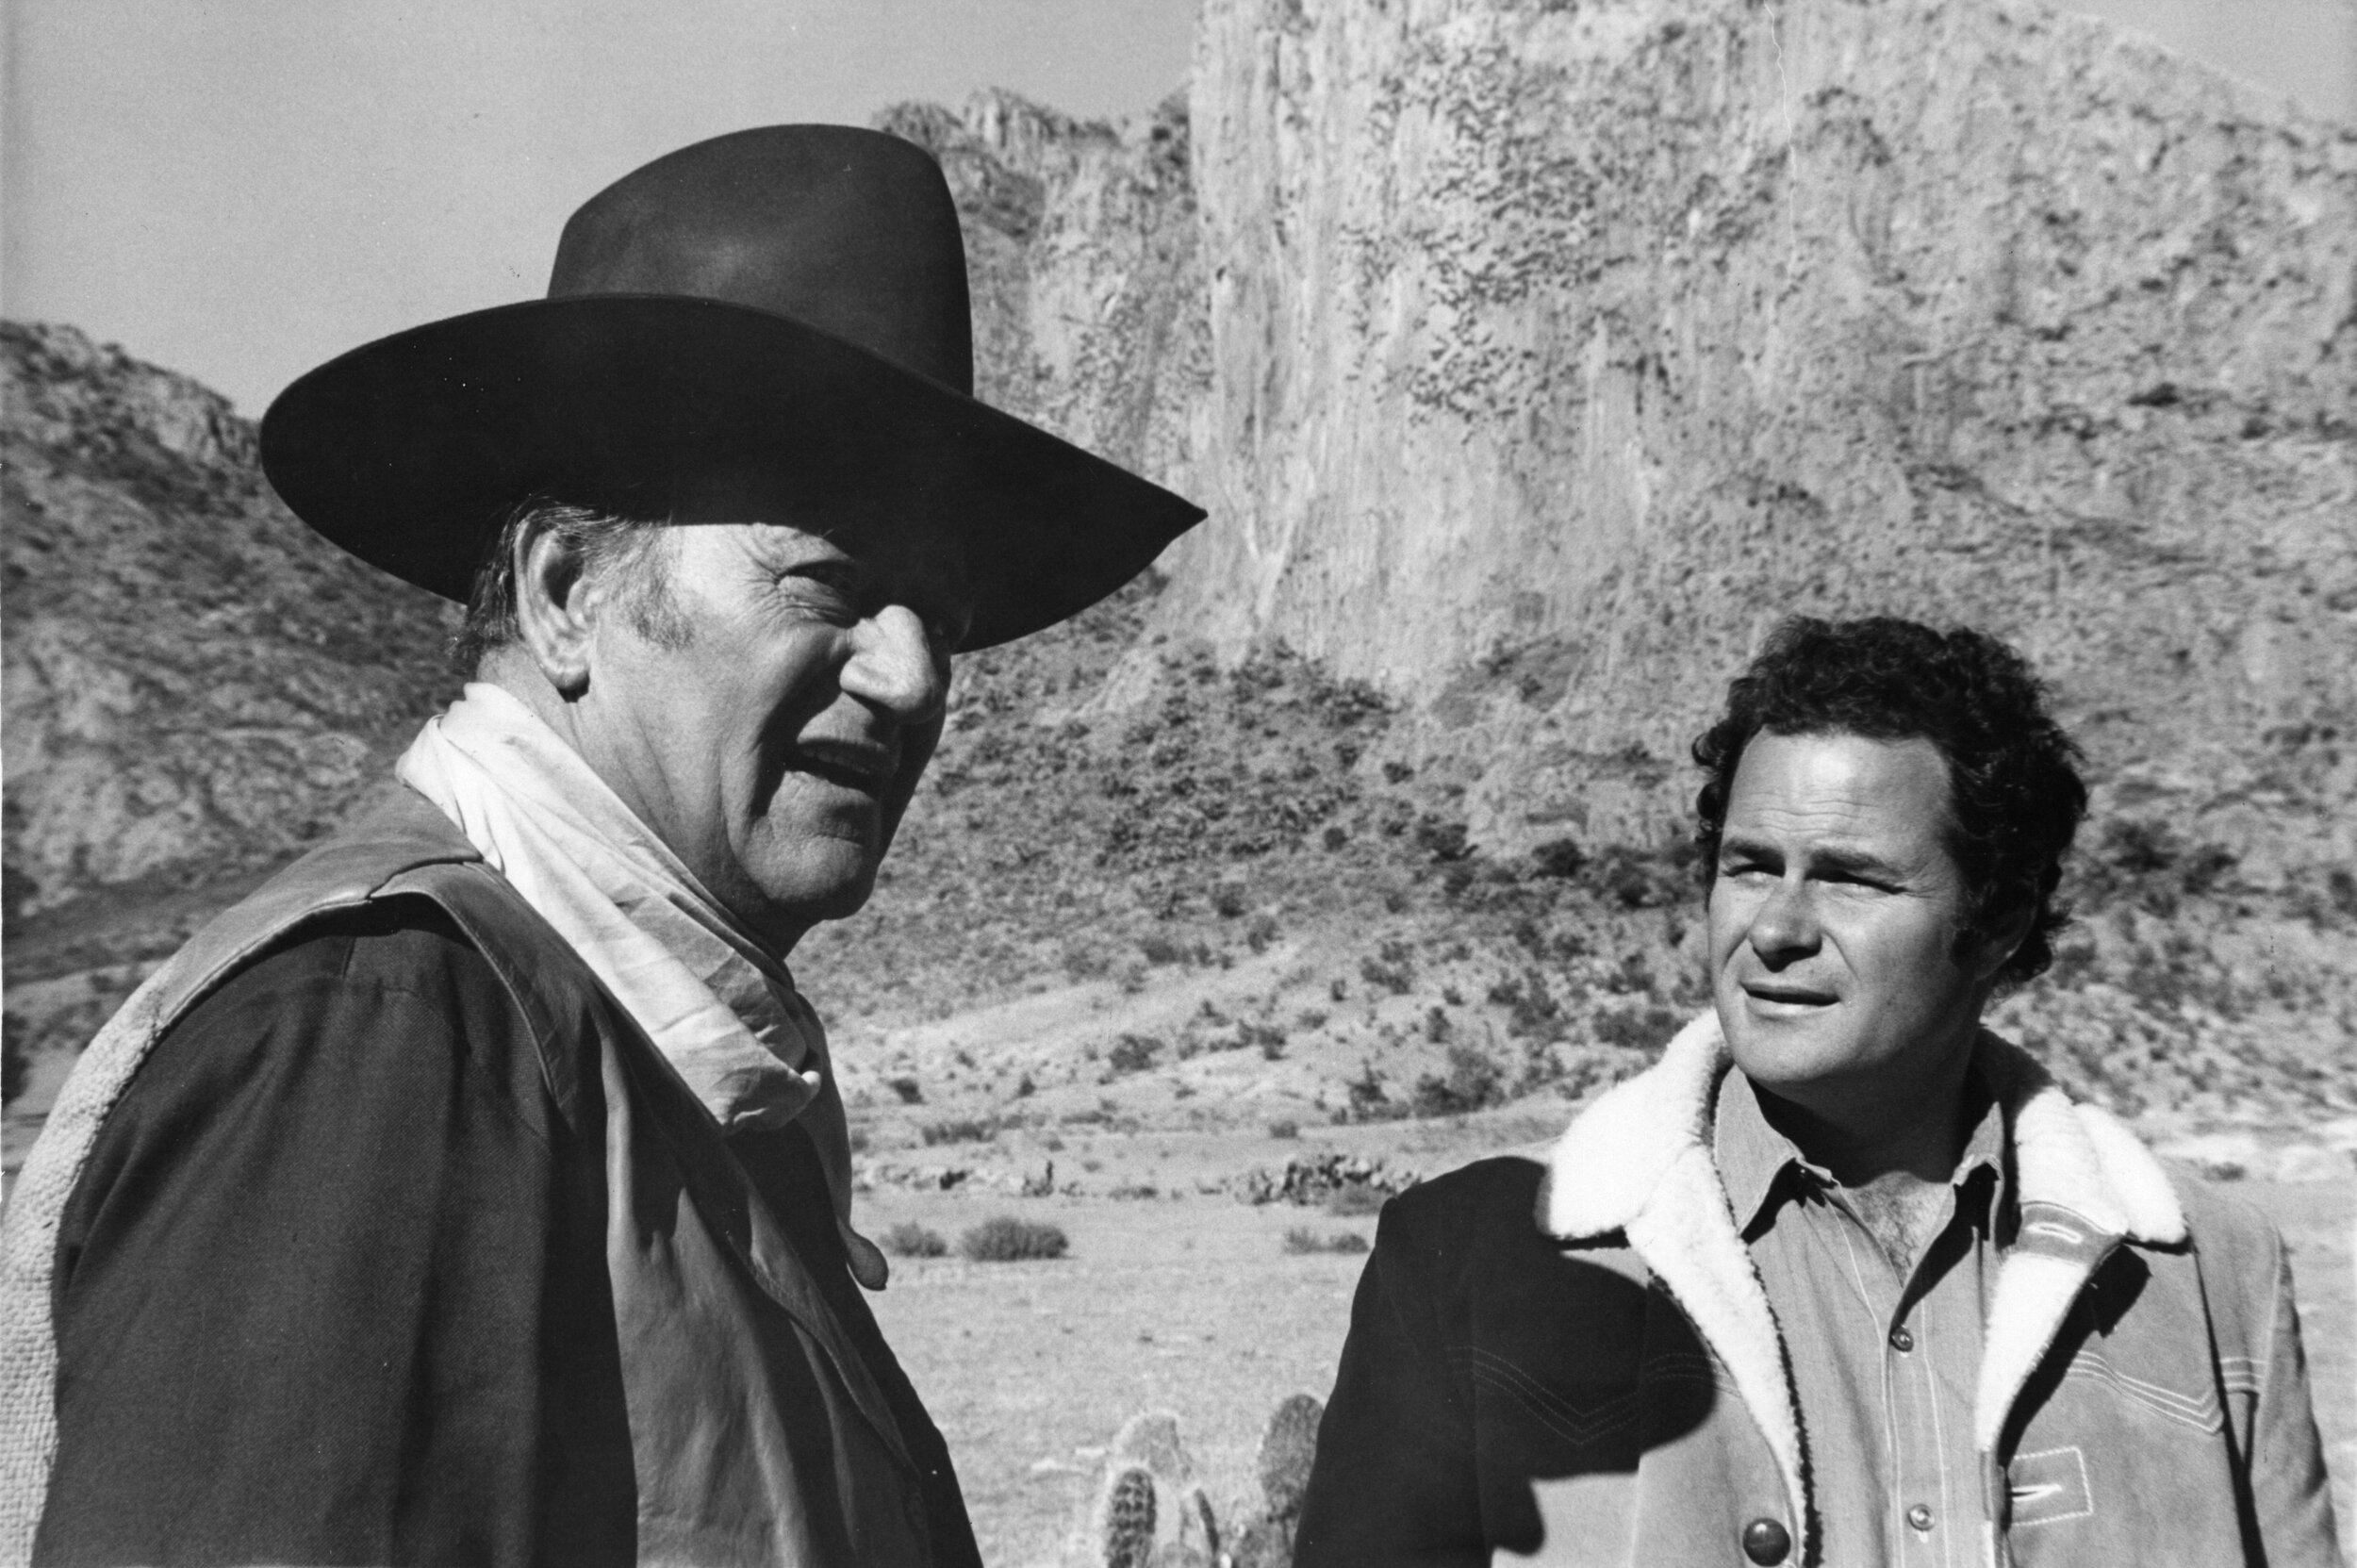 John Wayne and Michael on the set of 1973 Western film Cahil U.S. Marshal, produced by Batjac Productions.